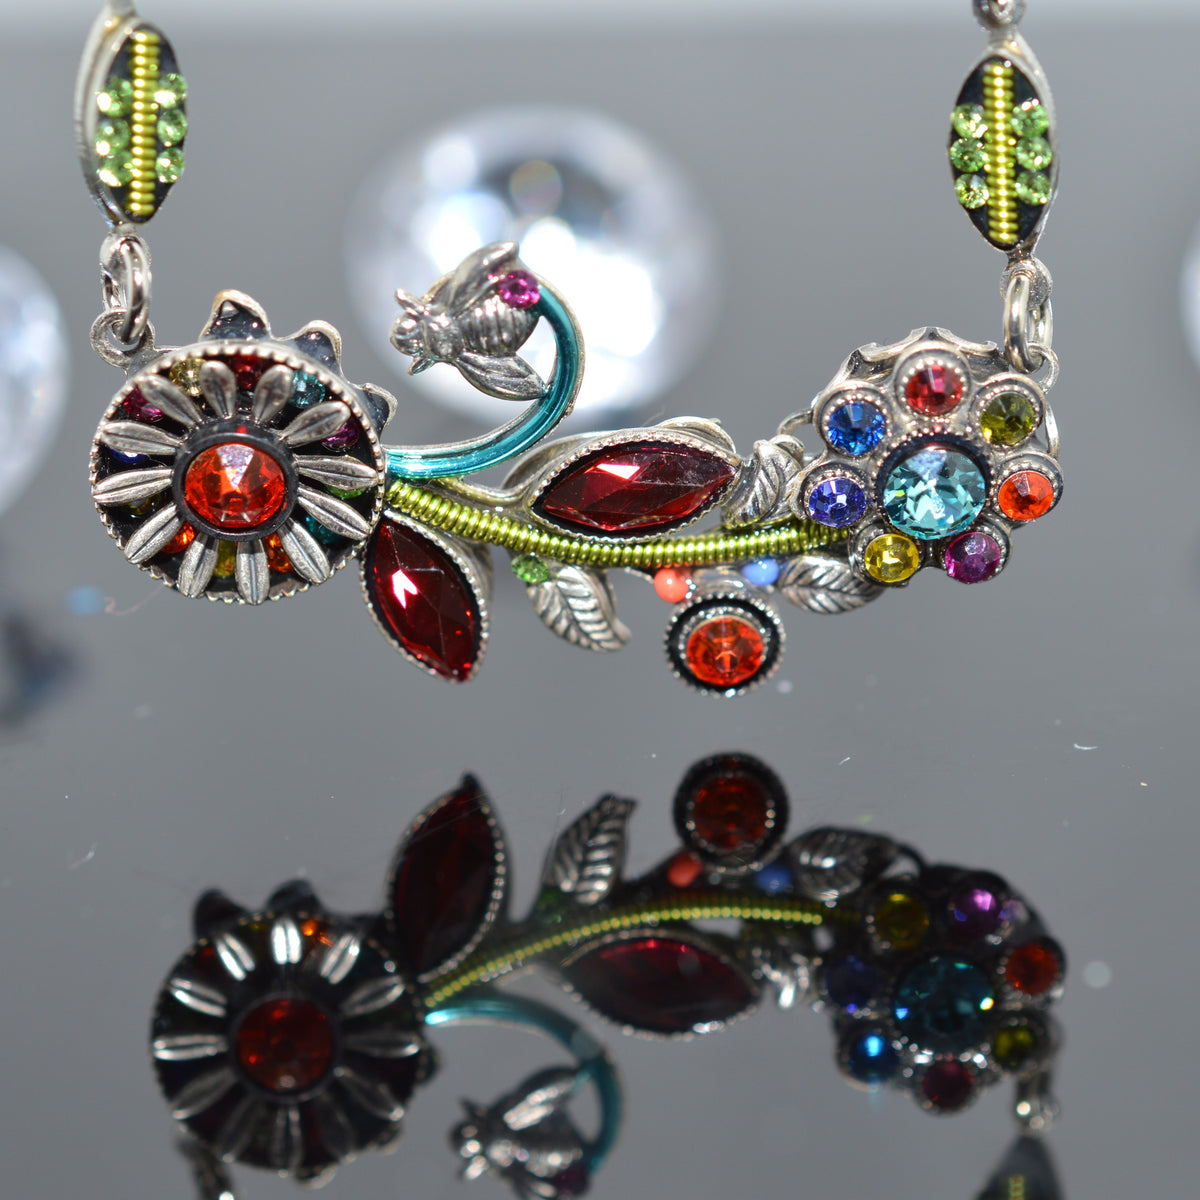 Antique Silver Plated Botanical Multicolored Crystal Necklace by Firefly